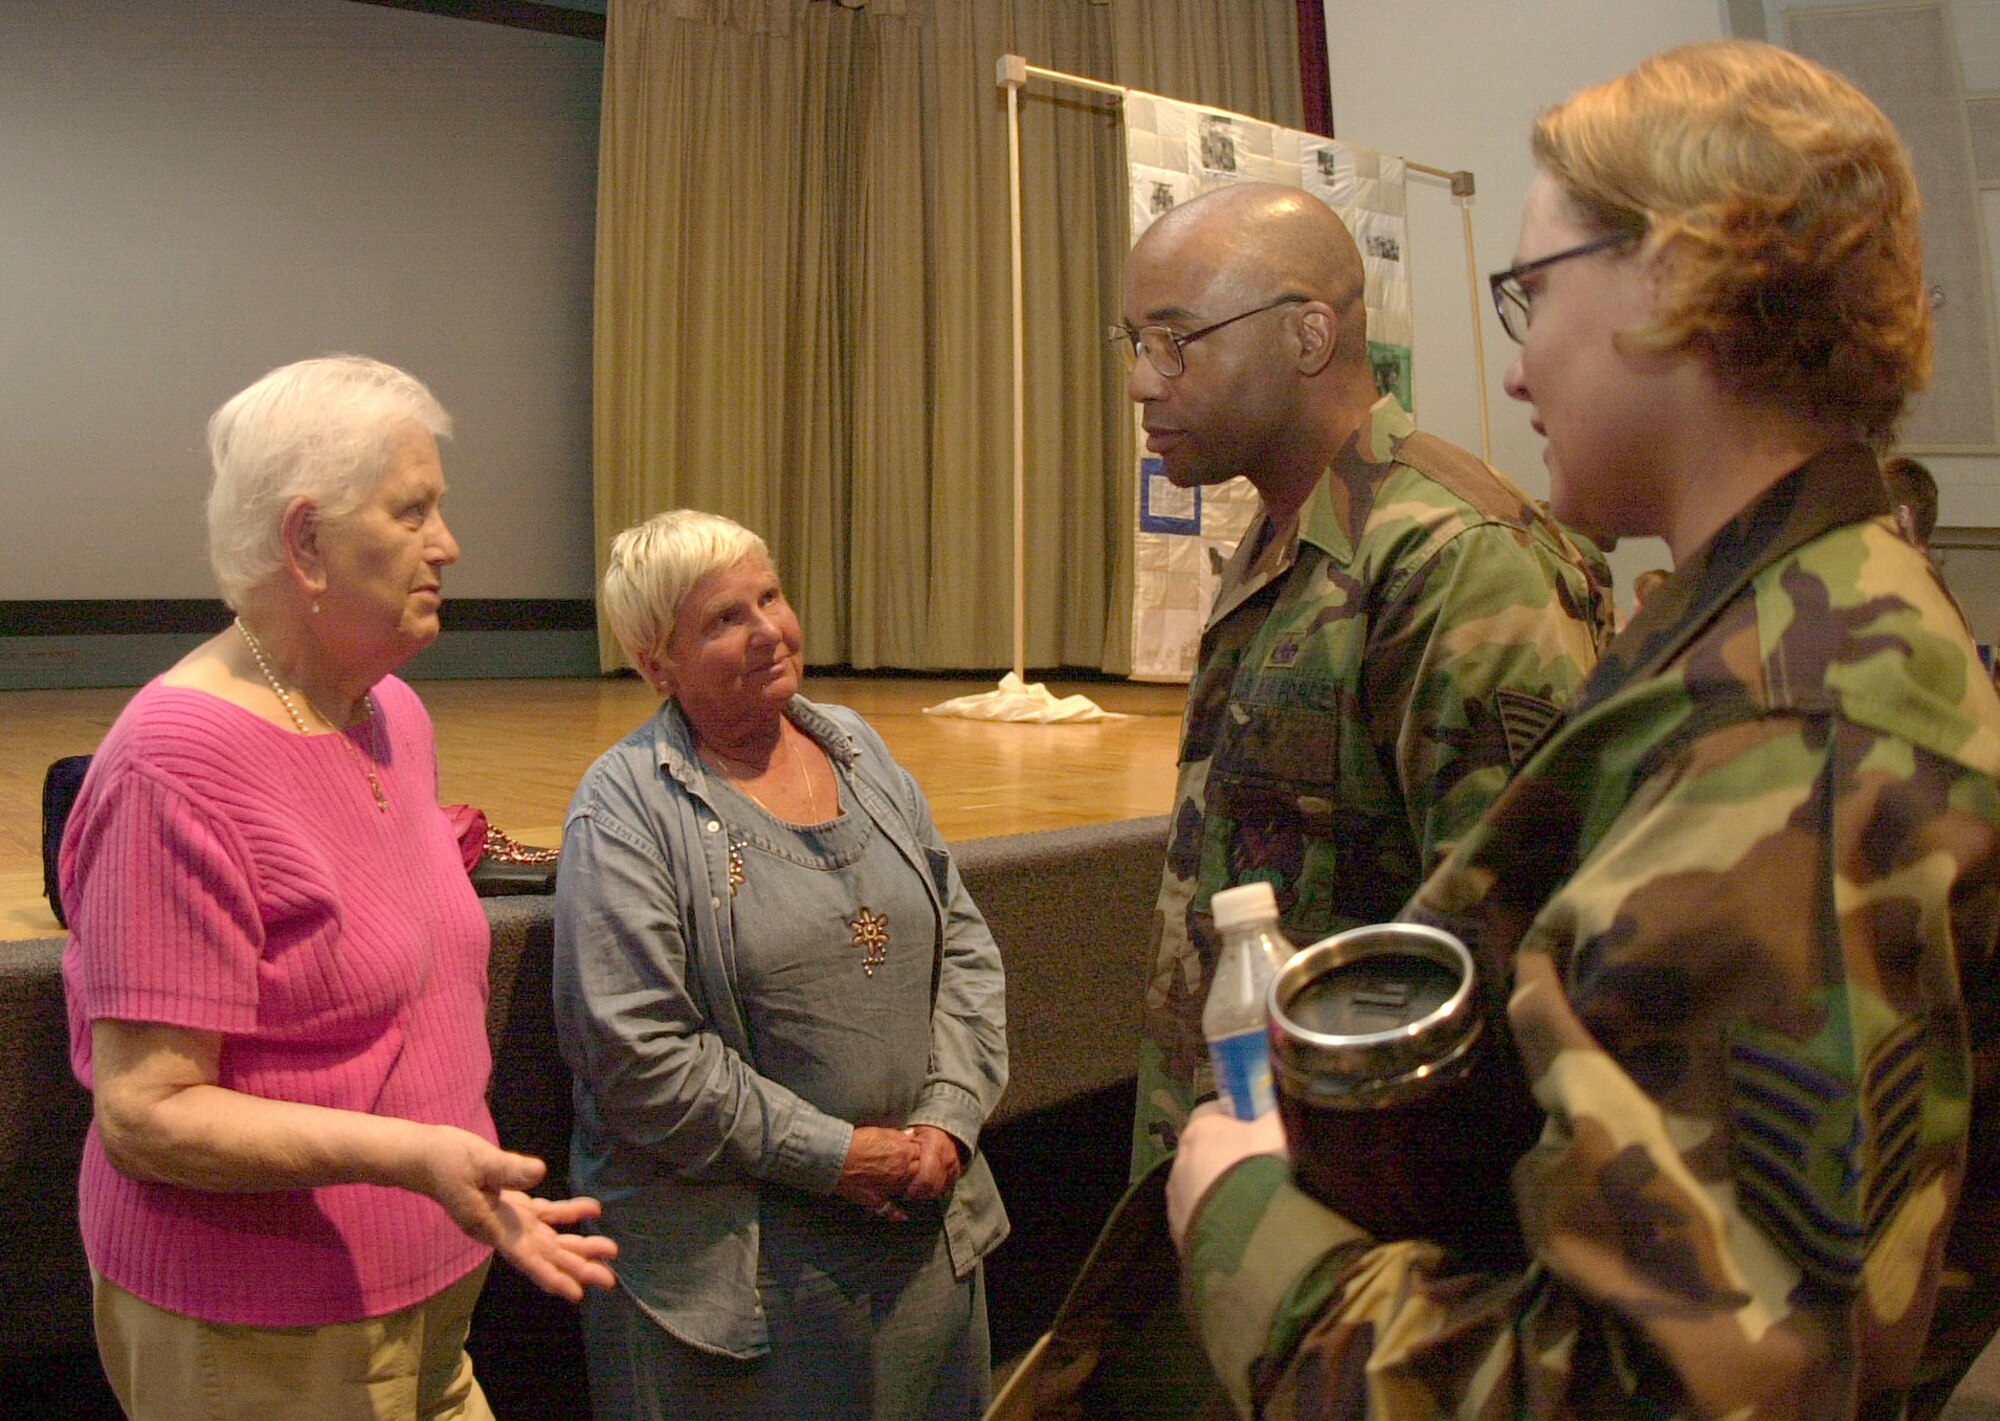 From left to right: Rosa Freund, a survivor of Auschwitz-Birkenau concentration camp, and Wanda Wolosky, a survivor of the Warsaw Ghetto, talk to guests who attended one of the History of the Holocaust presentations Thursday at the base theater. (U.S. Air Force photo by Airman 1st Class Luis Loza Gutierrez).